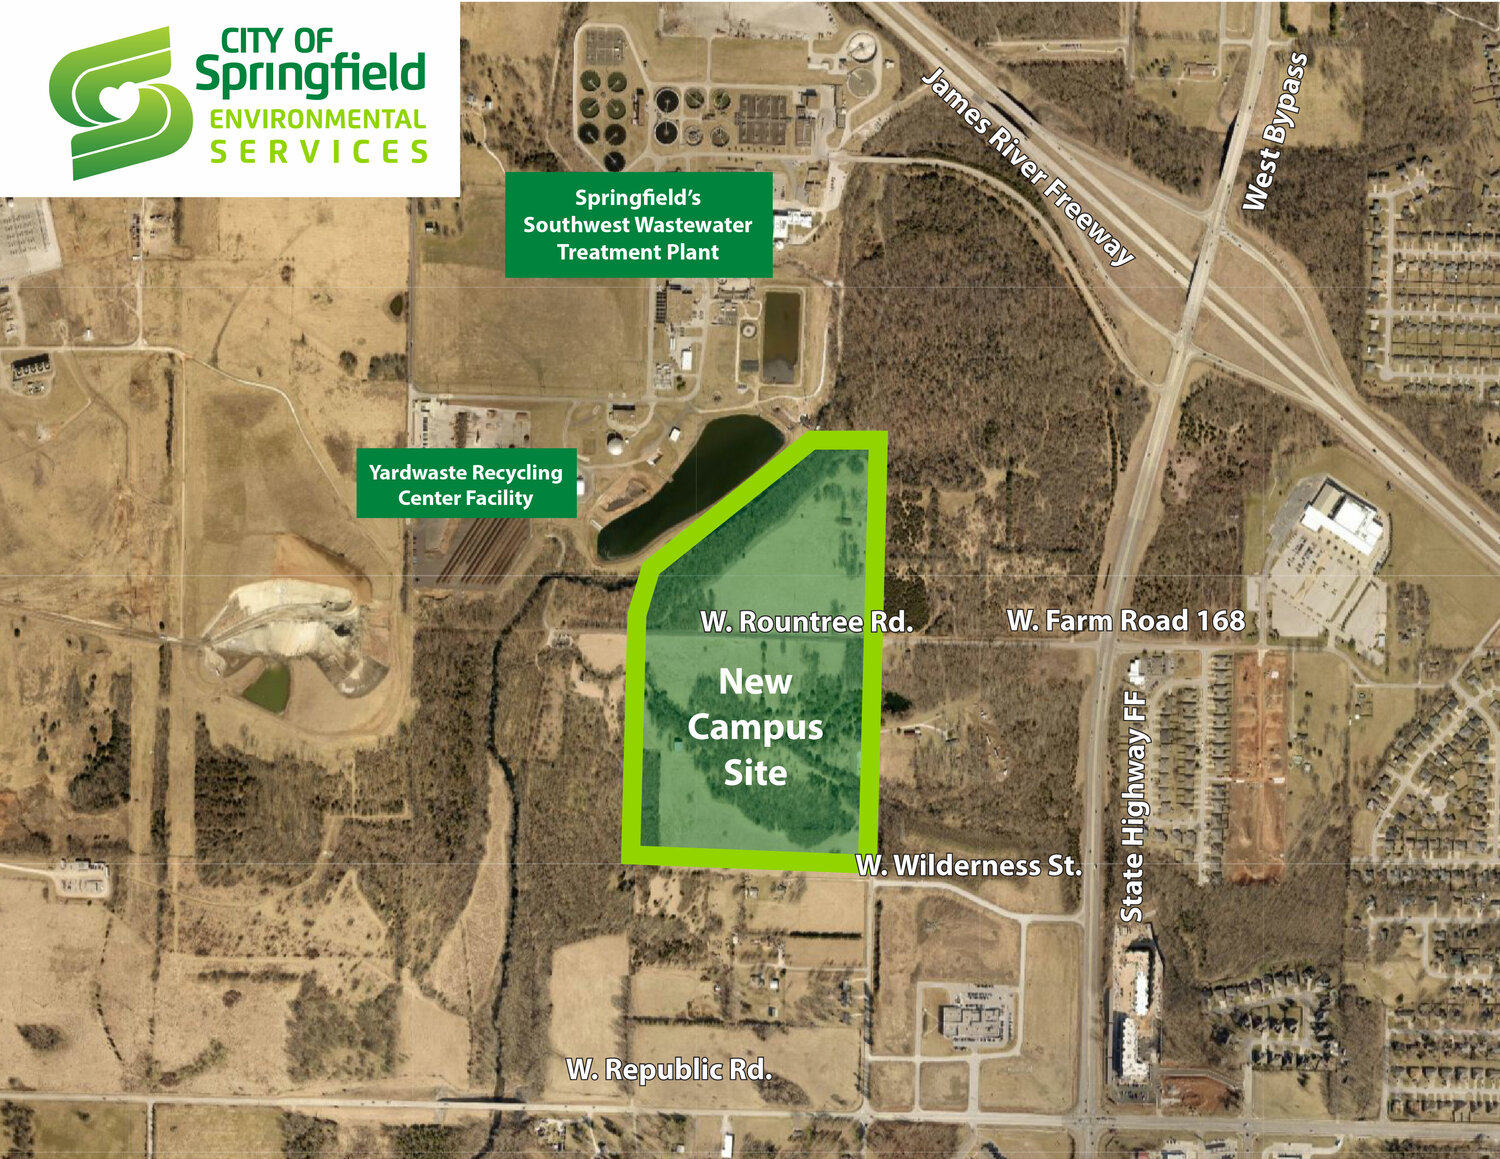 The project site is in southwest Springfield.